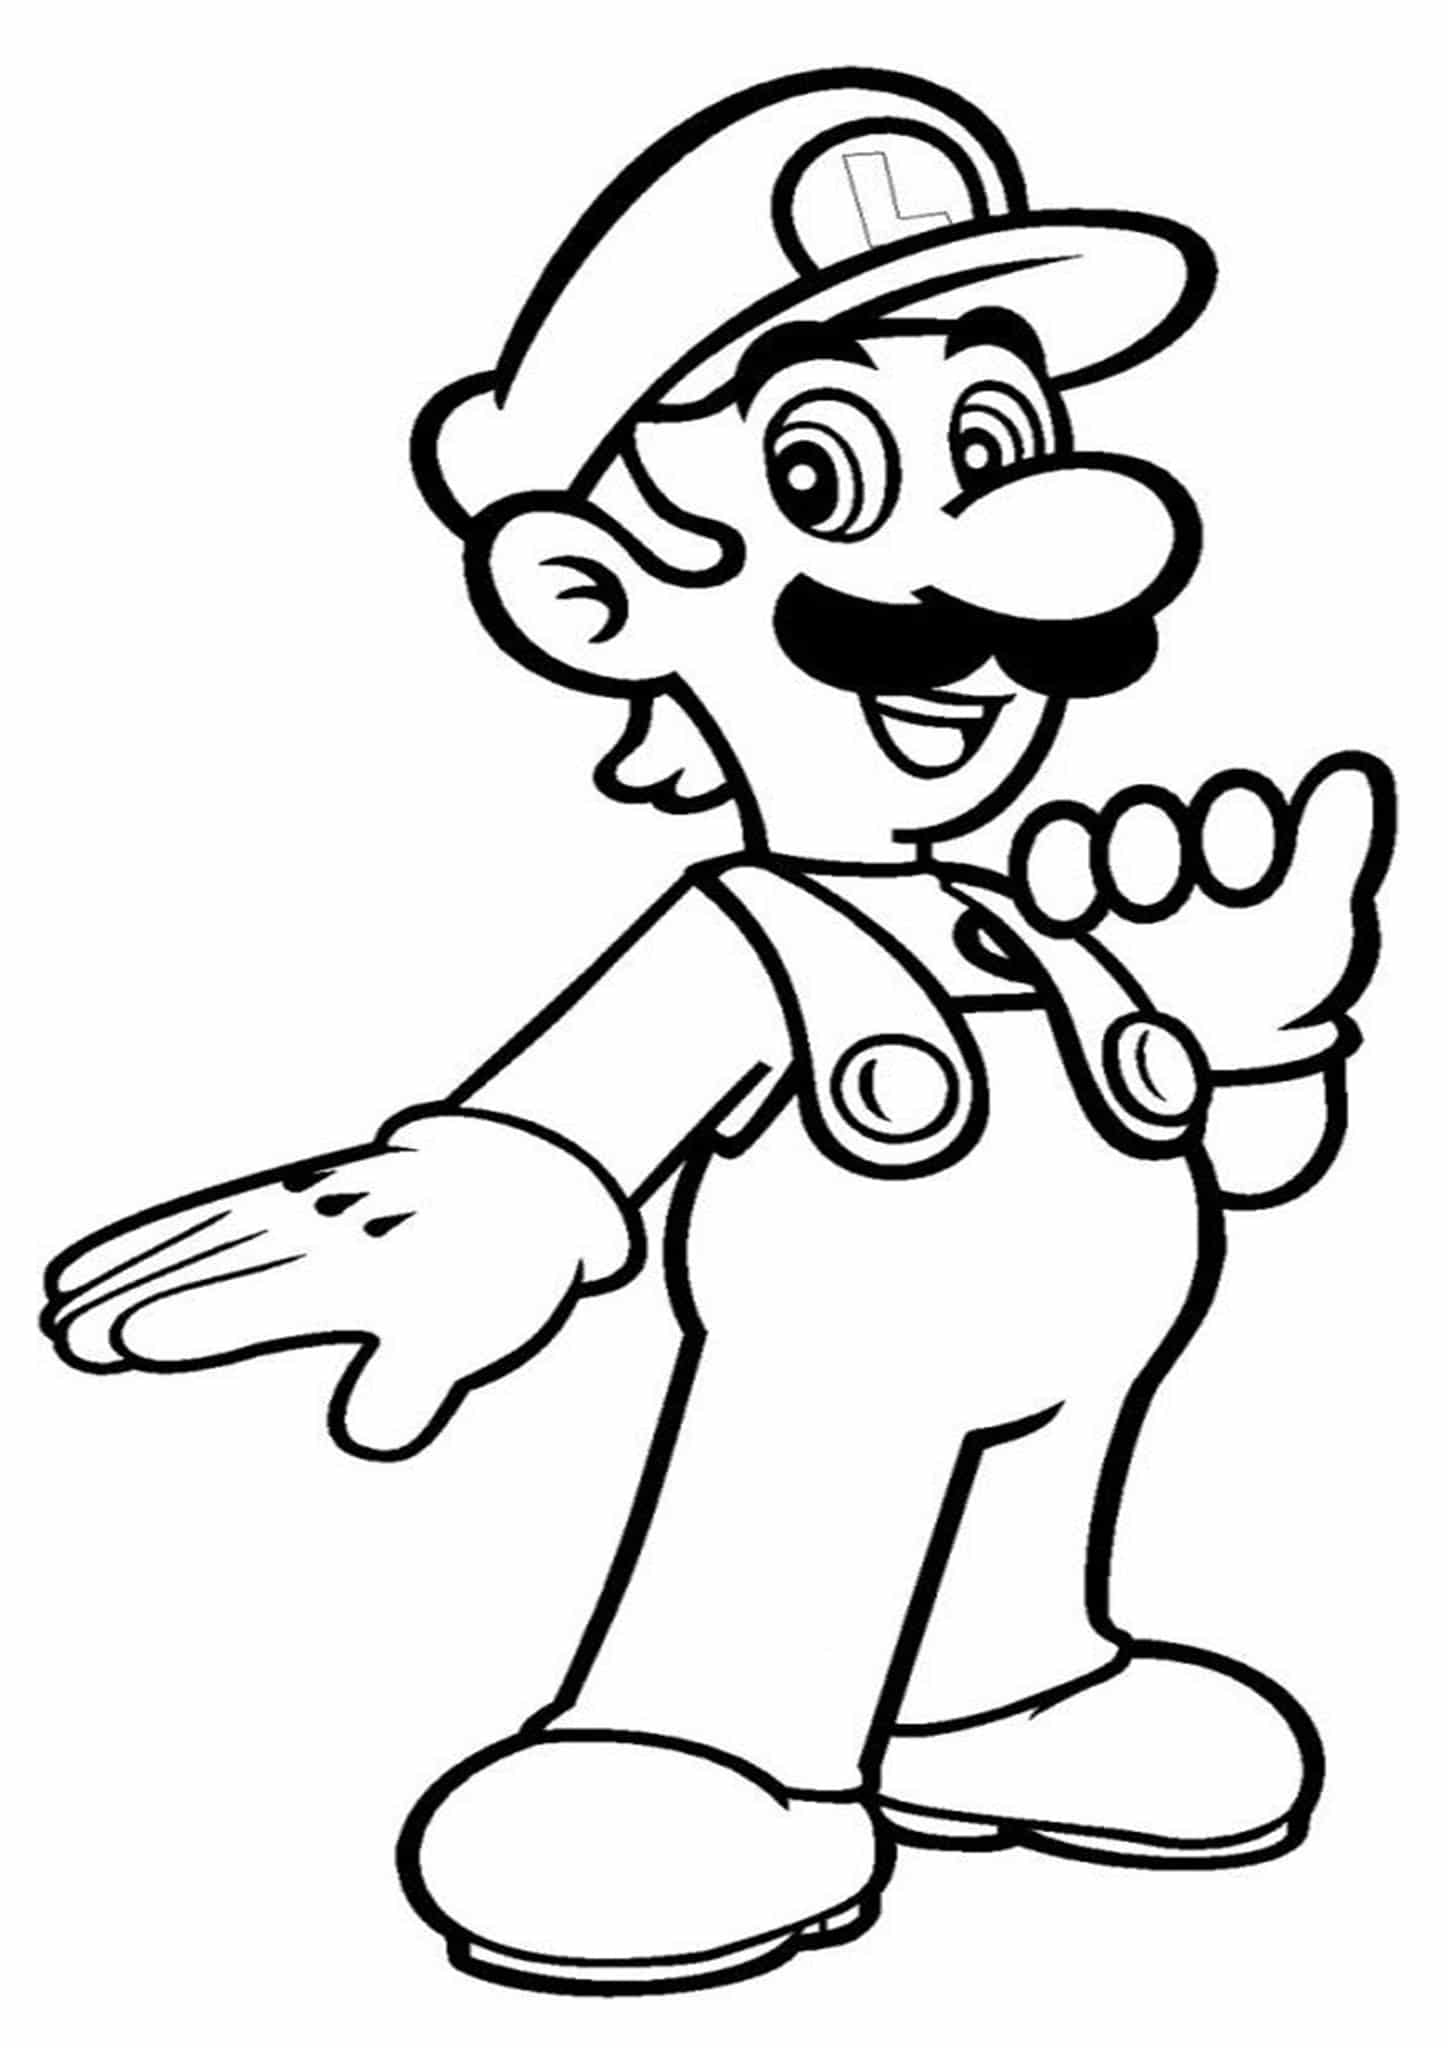 Free easy to print mario coloring page